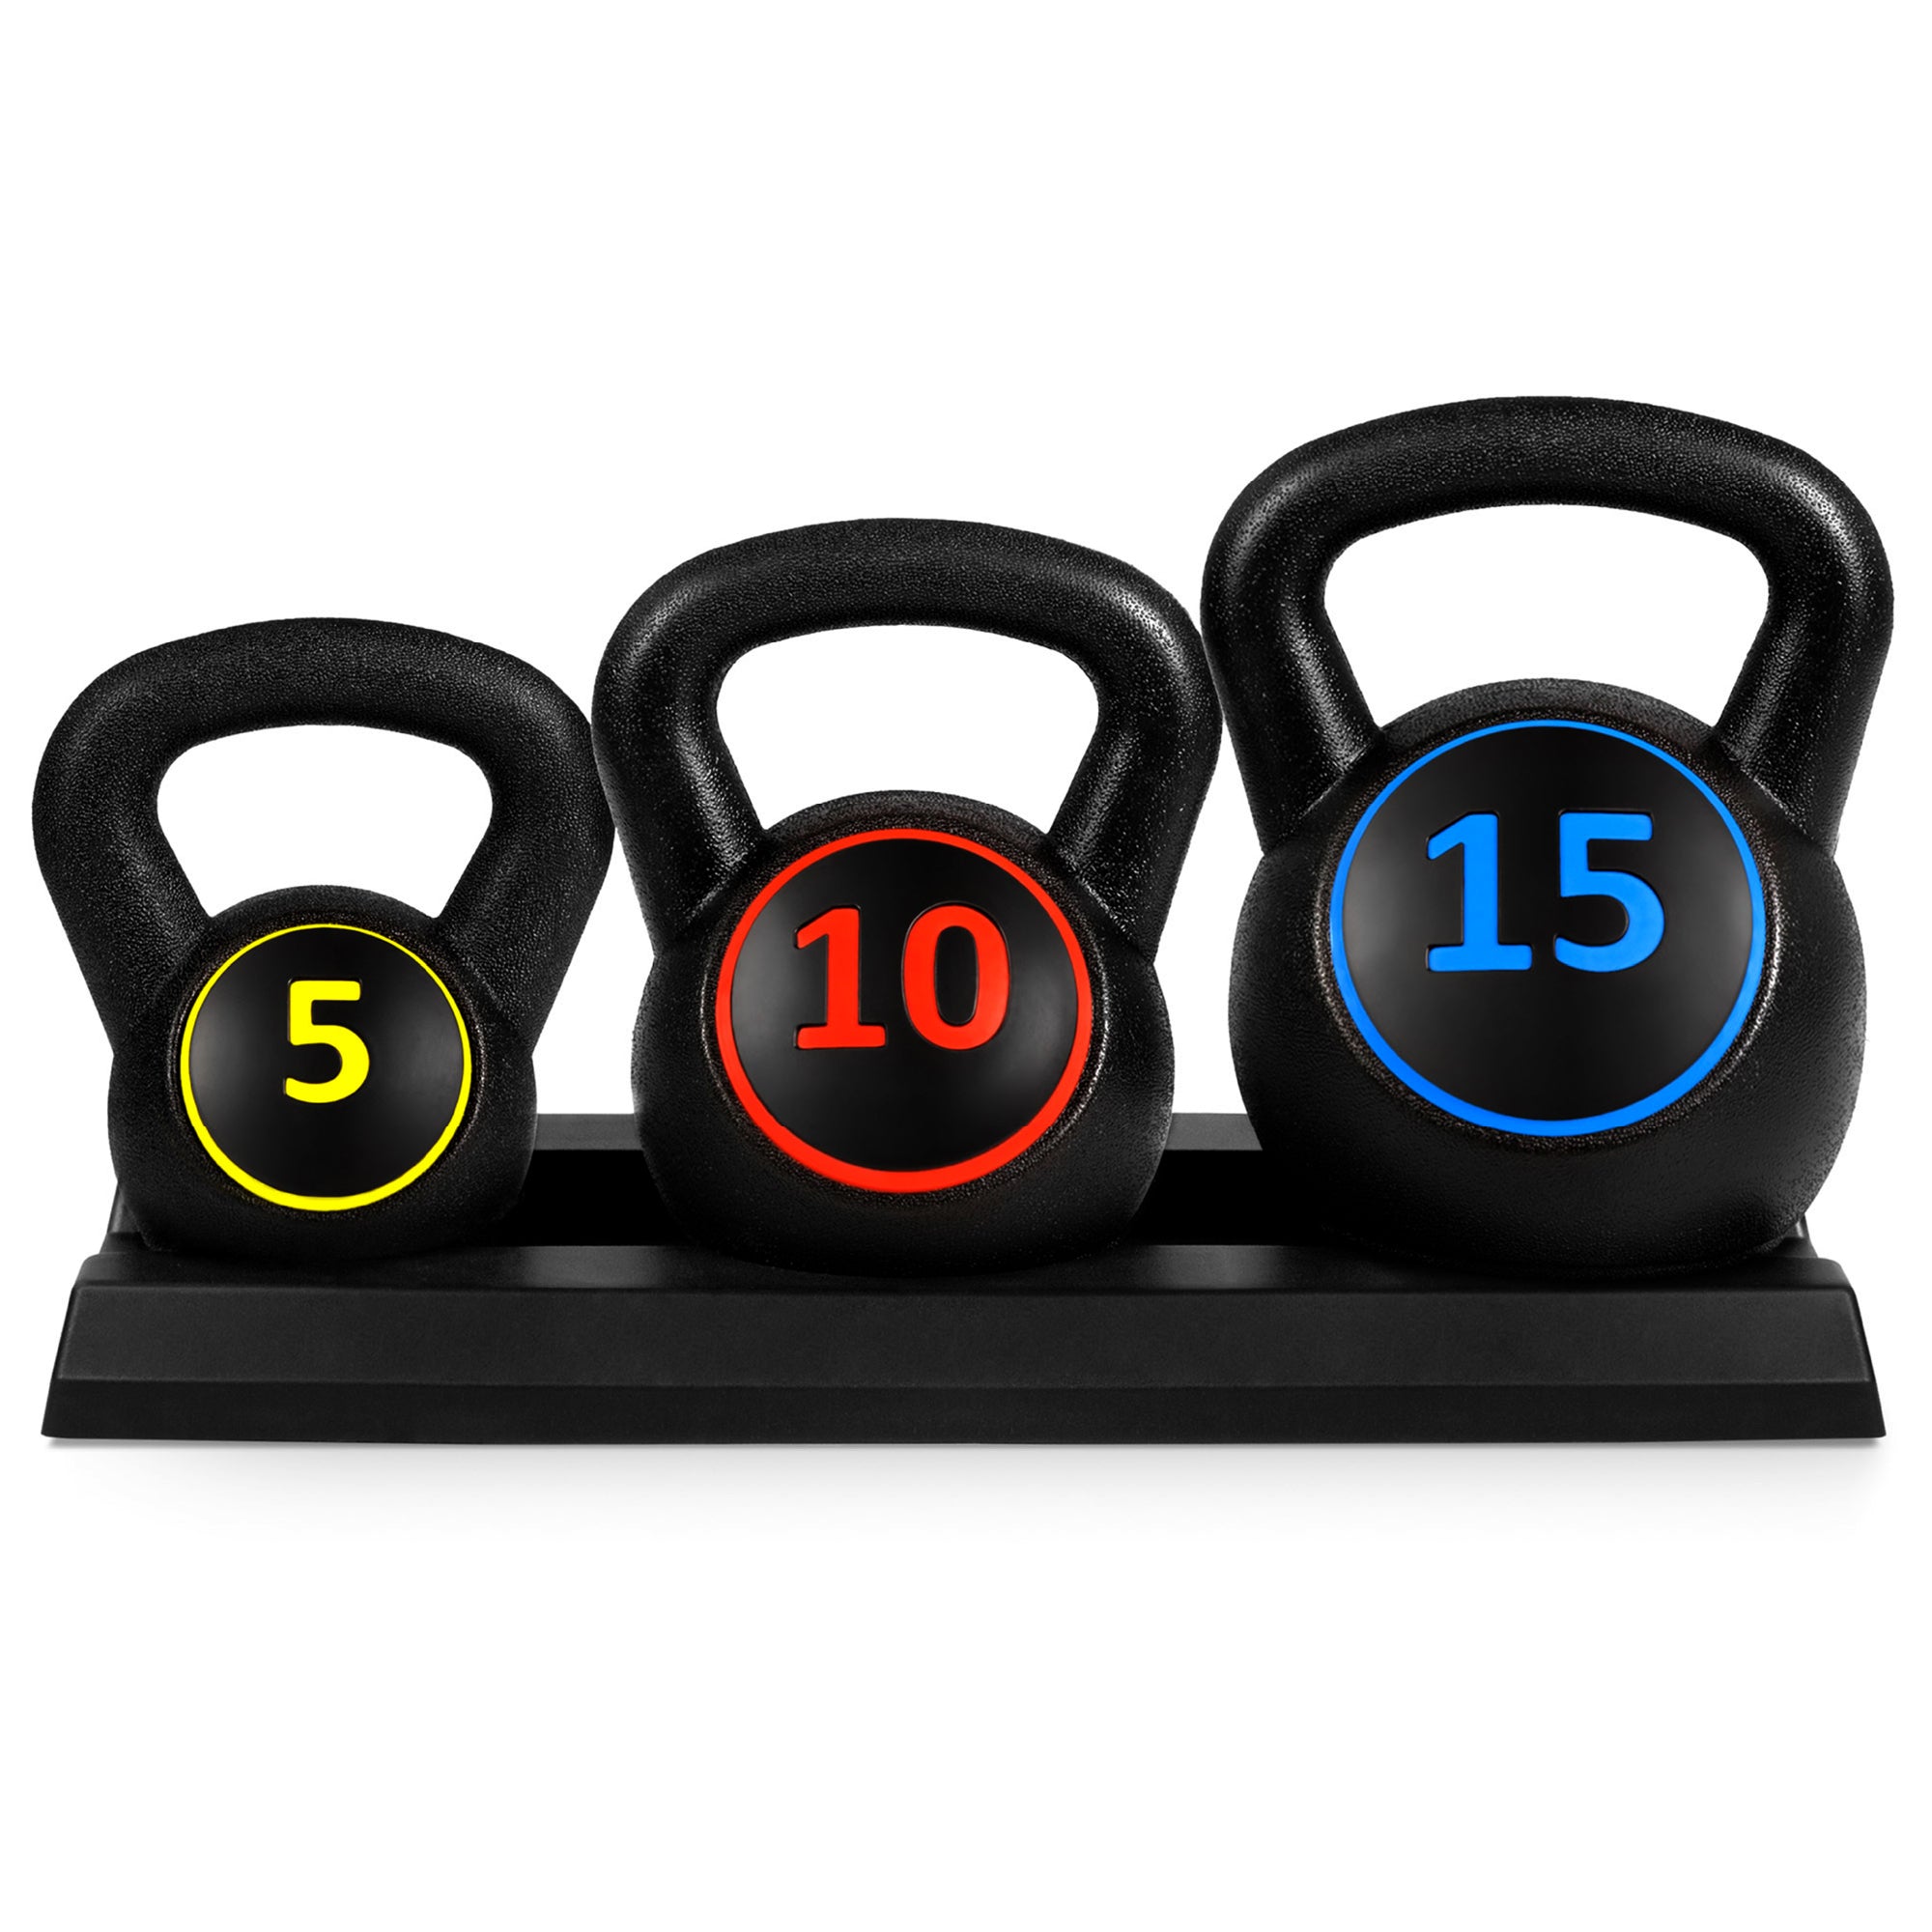 3-Piece Exercise Fitness Weight Set w/ Storage – Best Choice